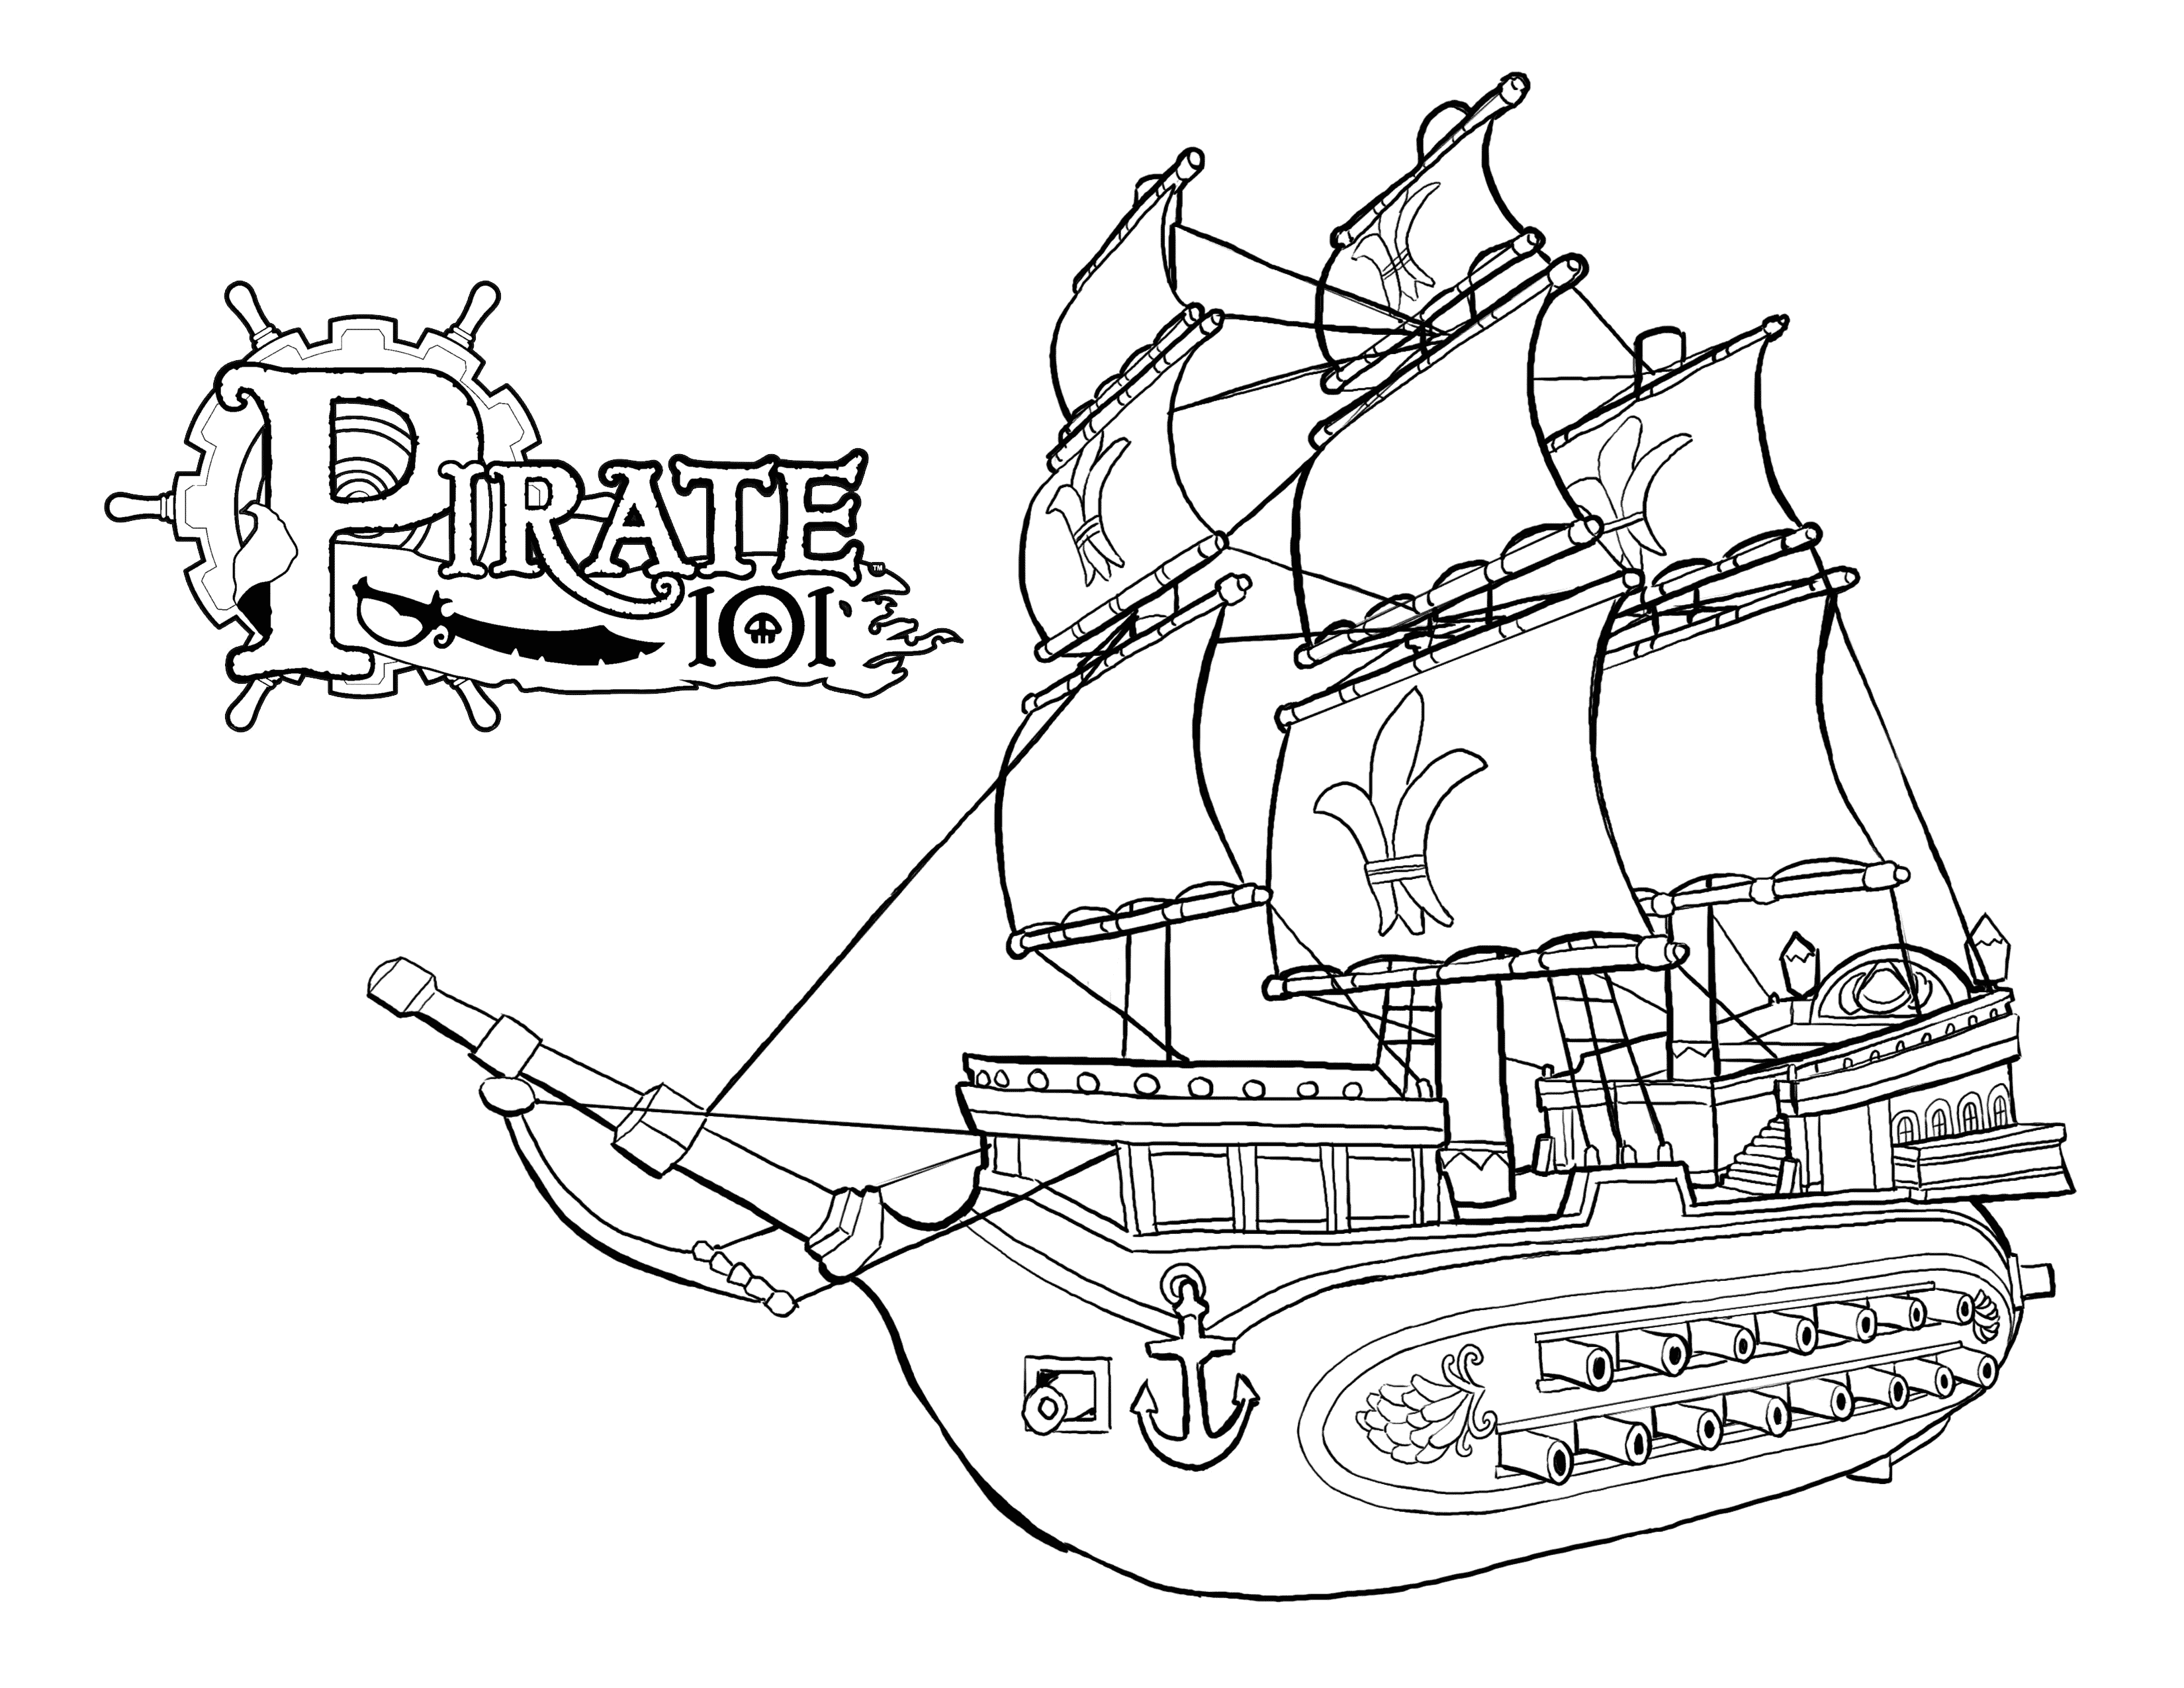 Boat Coloring Pages Free at GetColorings.com | Free printable colorings